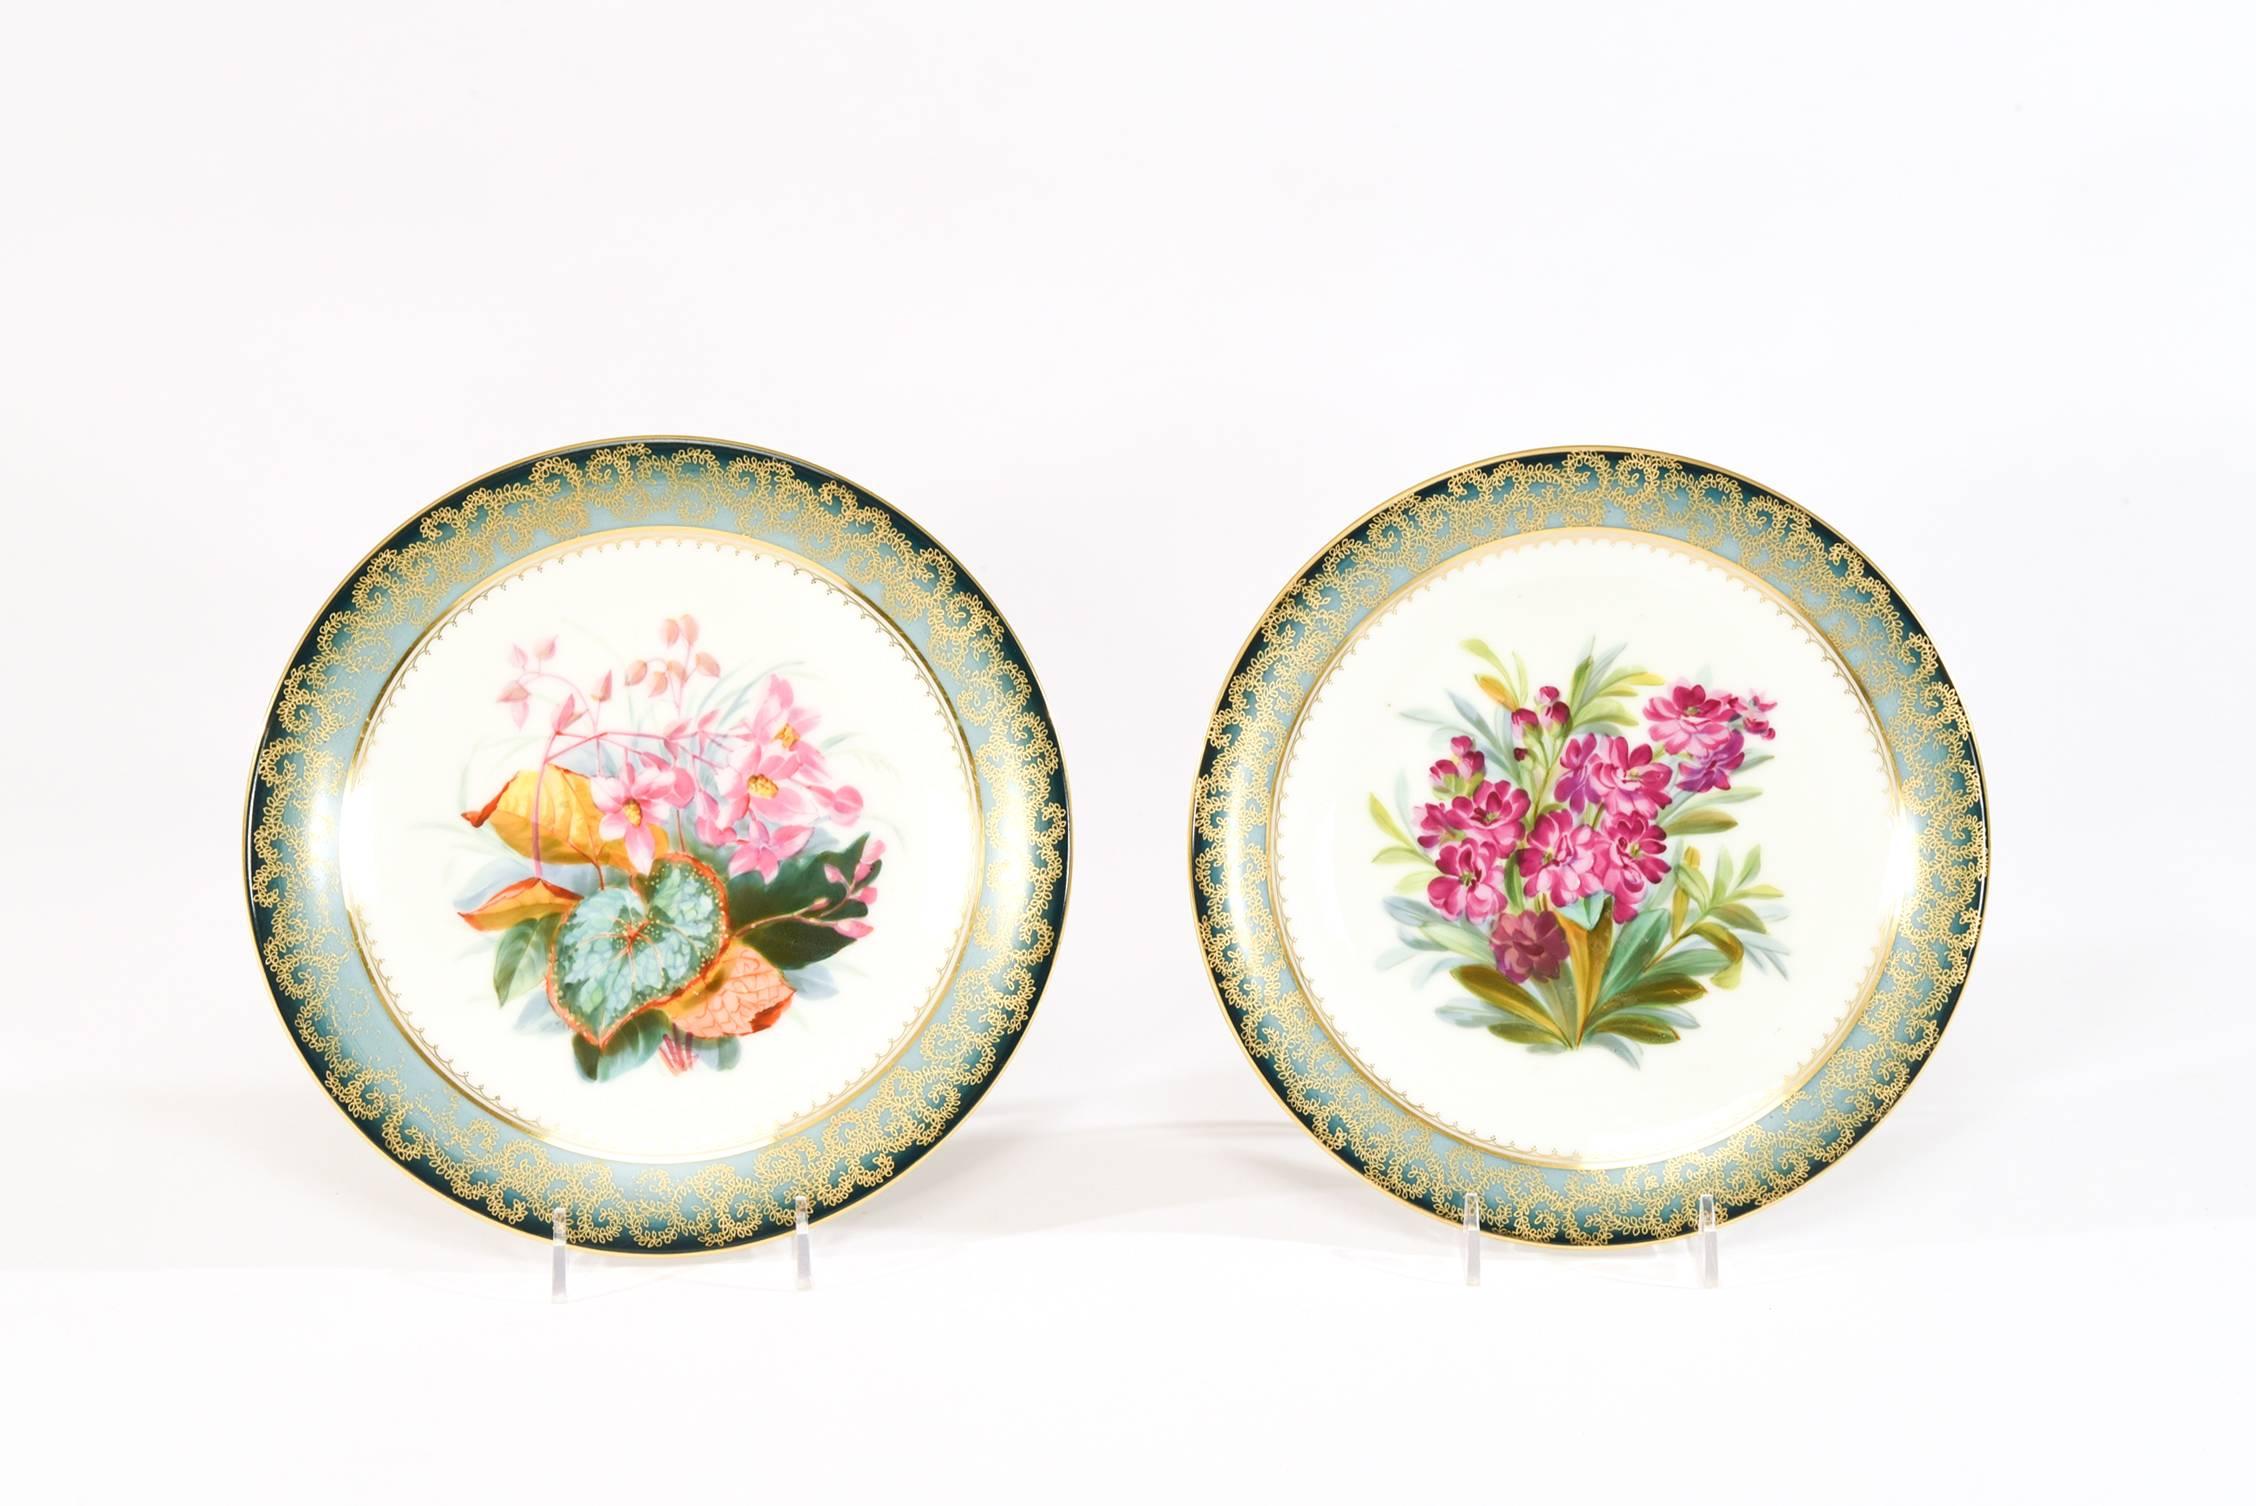 This set of hand painted botanical dessert plates feature a vibrant floral subject in a varied palette and each is framed by an unusual Impressionistic border that moves from dark teal green and fades subtly to a soft shade of green highlighted with